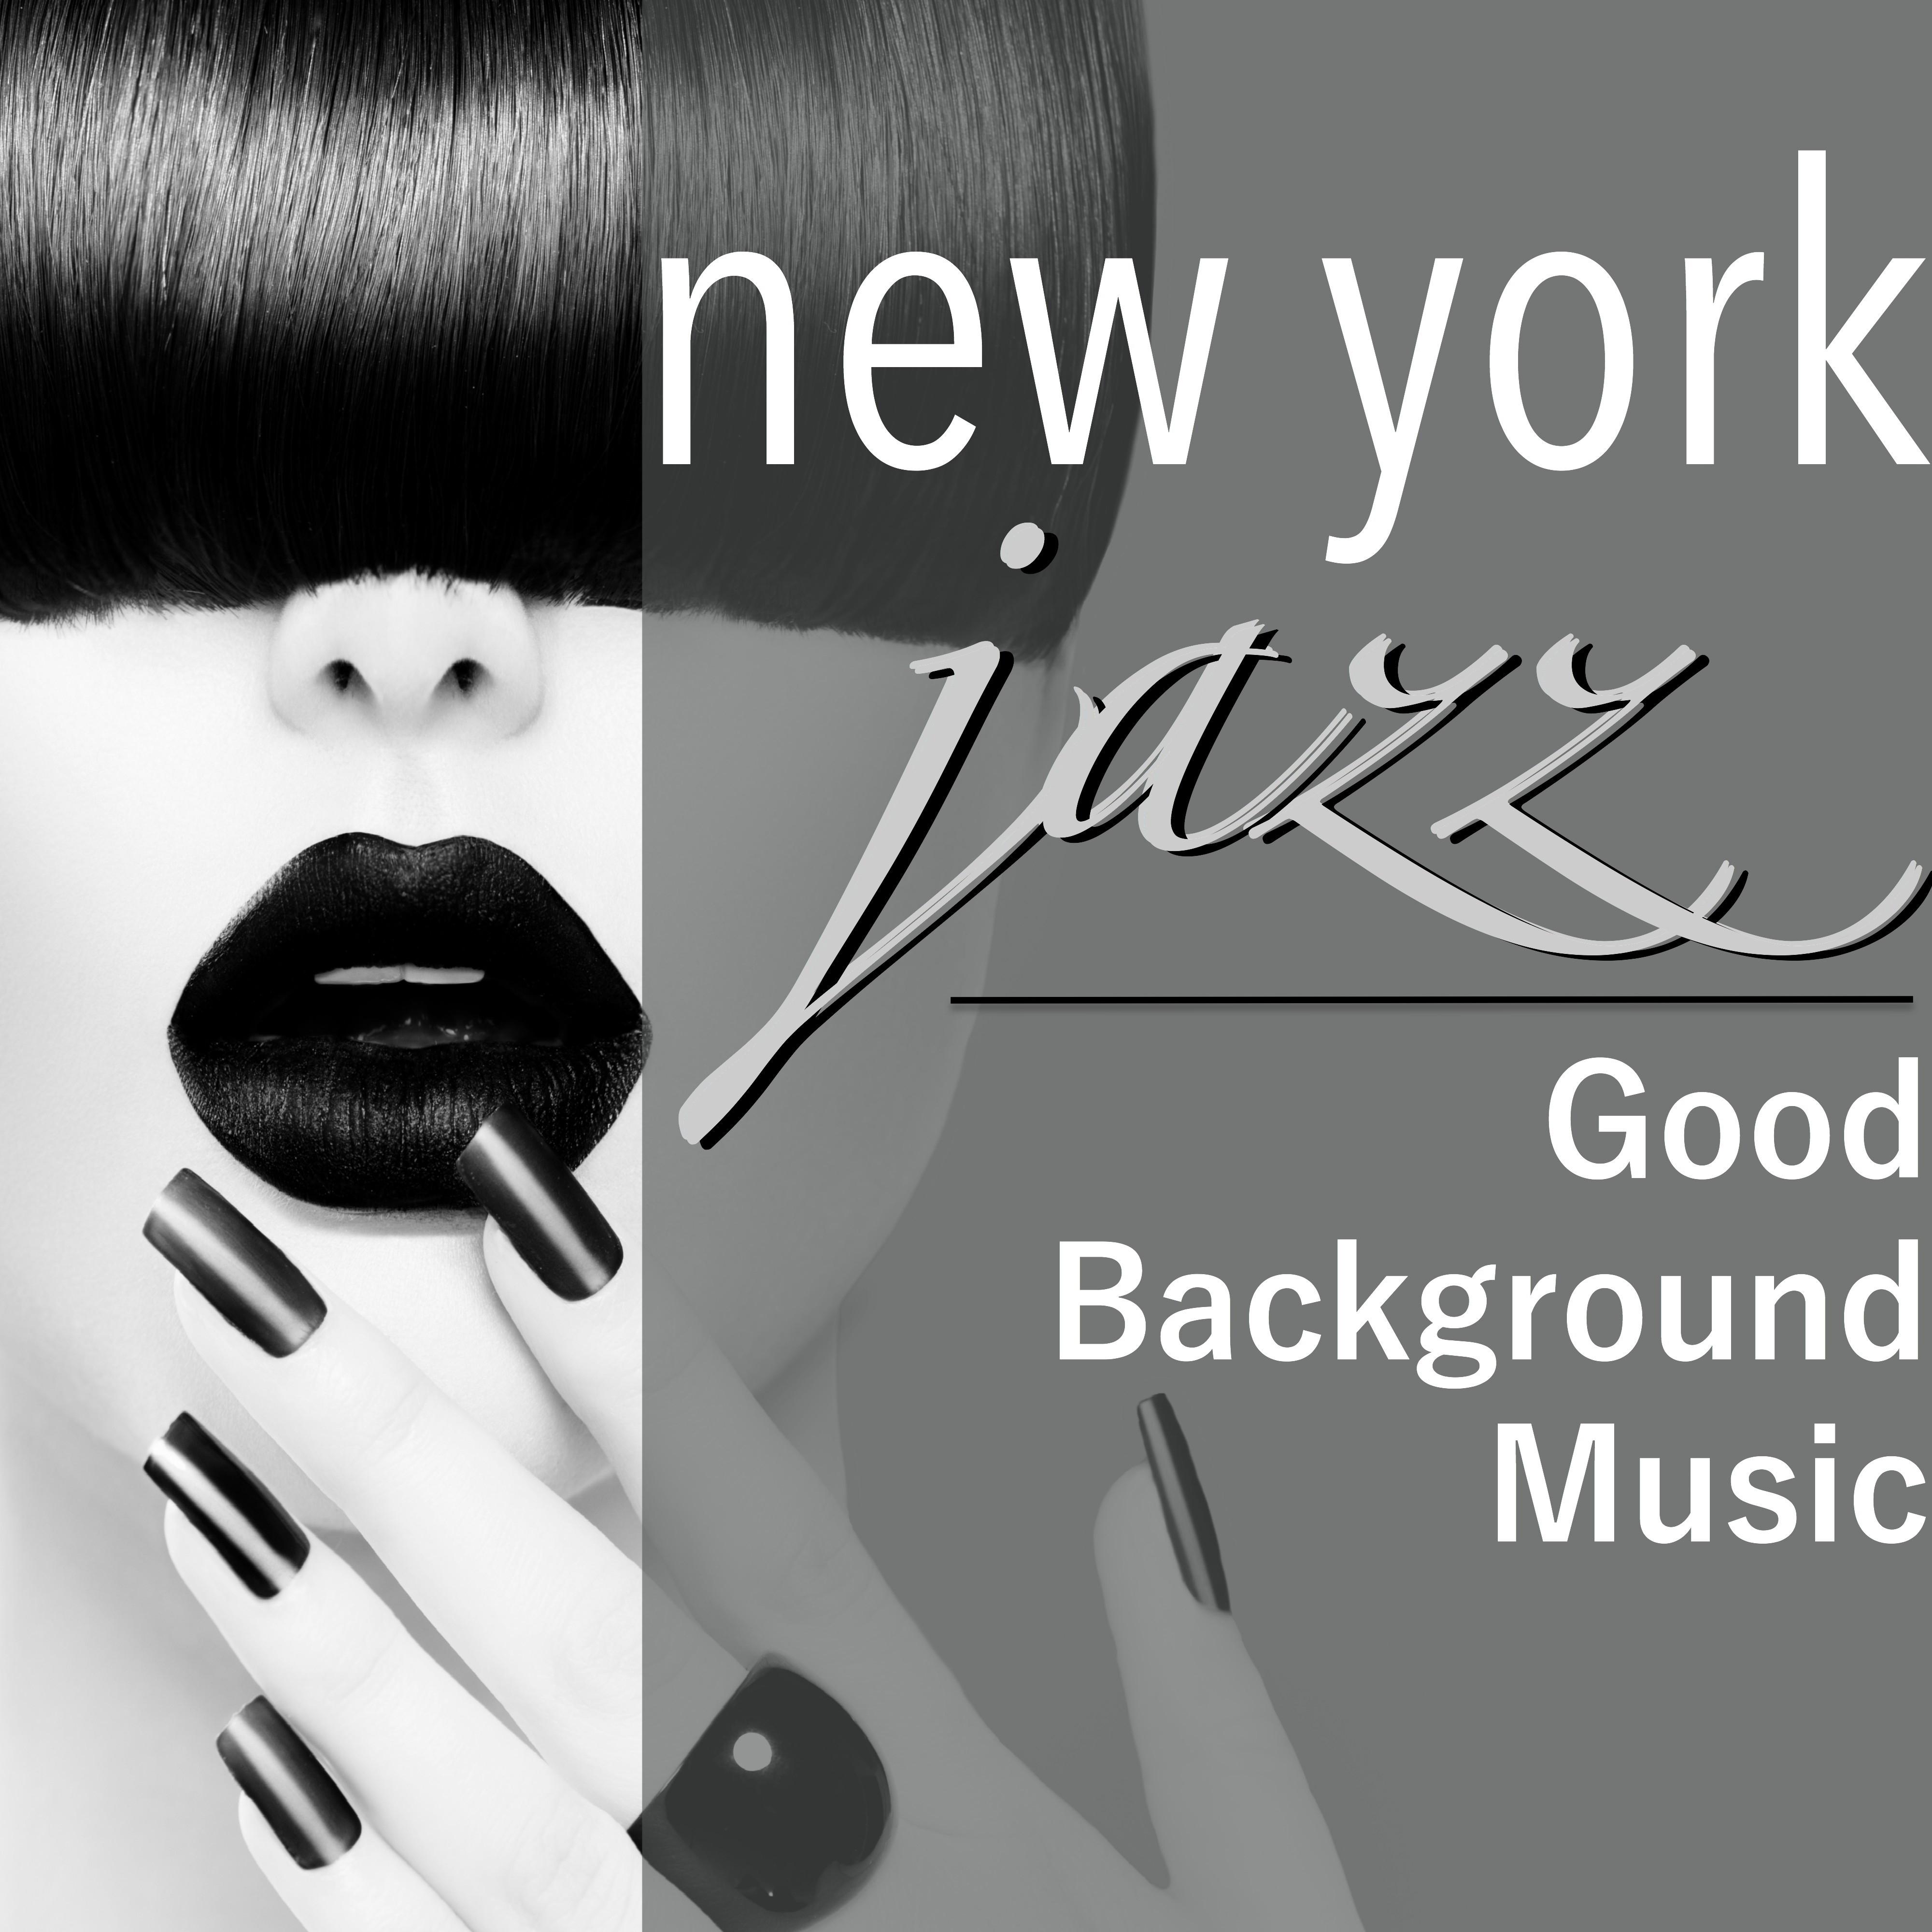 New York Jazz Piano Bar - Good Background Music, Smooth Jazz and Blues for Reastaurant, Lounge Bar and Cocktail Party